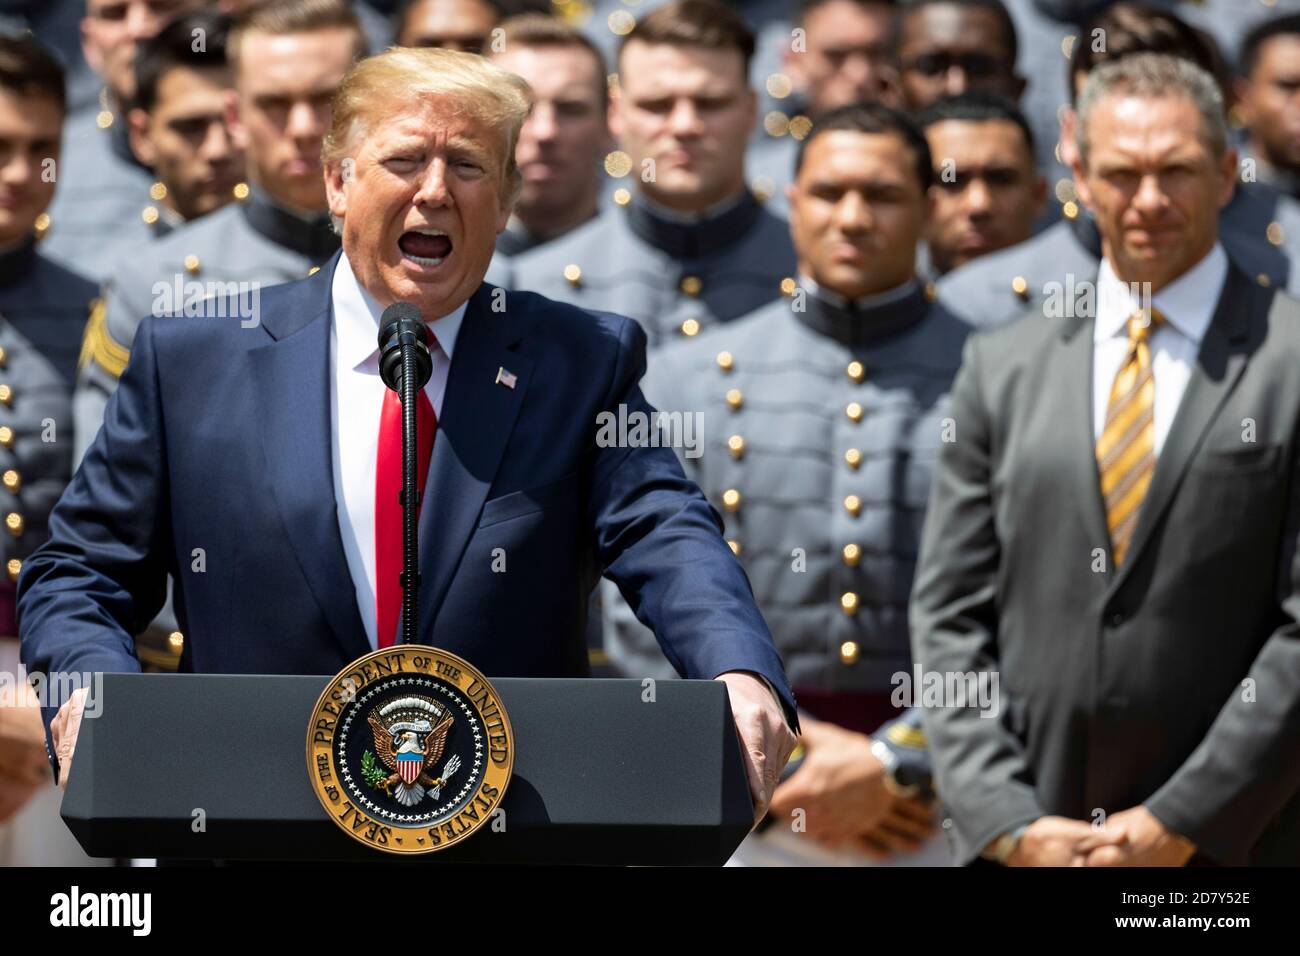 U.S. President Donald Trump delivers remarks prior to presenting the Commander-in-Chief’s trophy to the team in the White House Rose Garden in Washington, D.C. on Monday, May 6, 2019. Credit: Alex Edelman/The Photo Access Stock Photo